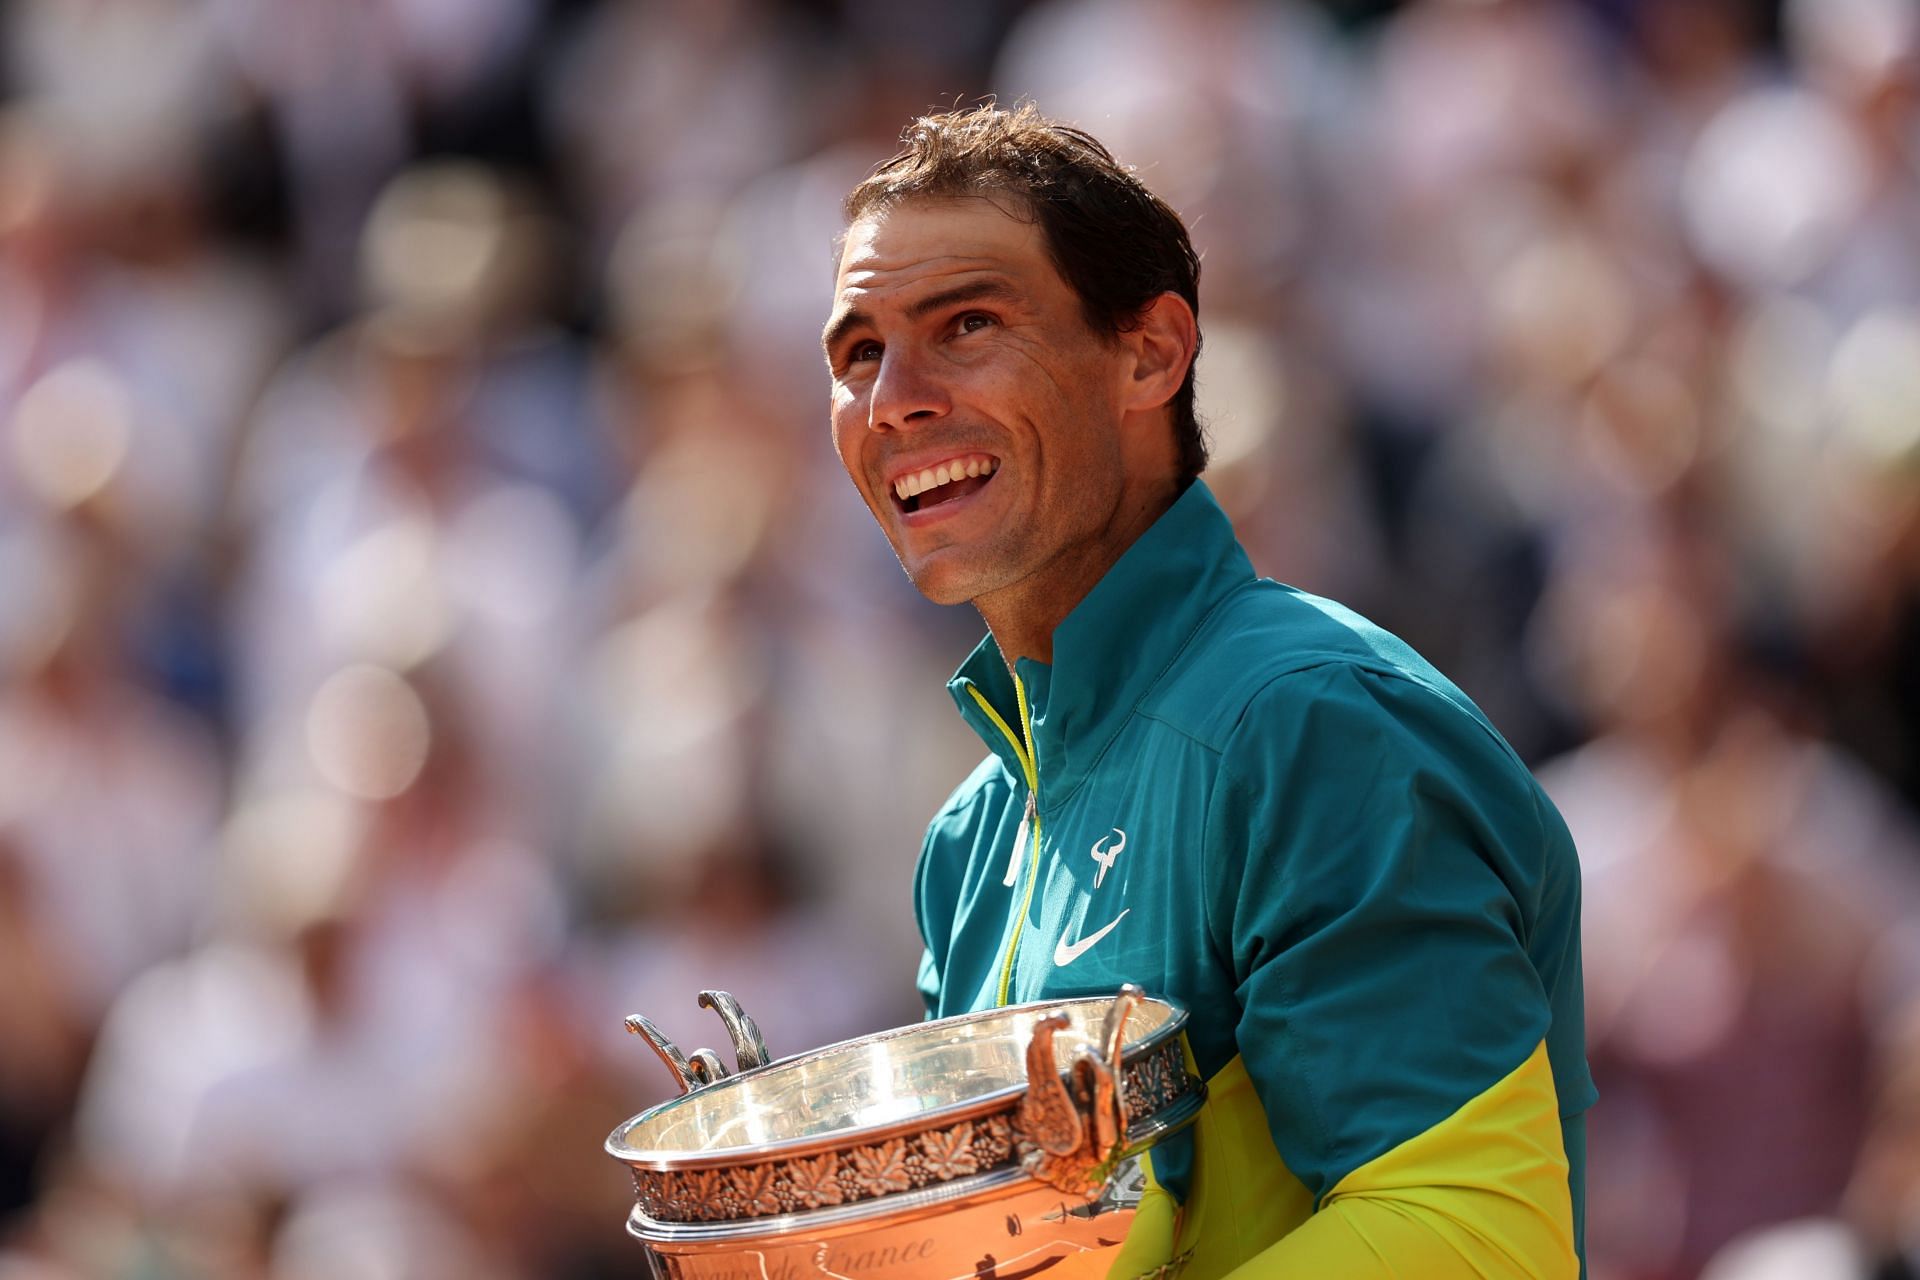 Rafael Nadal celebrating his 14th French Open title triumph in 2022